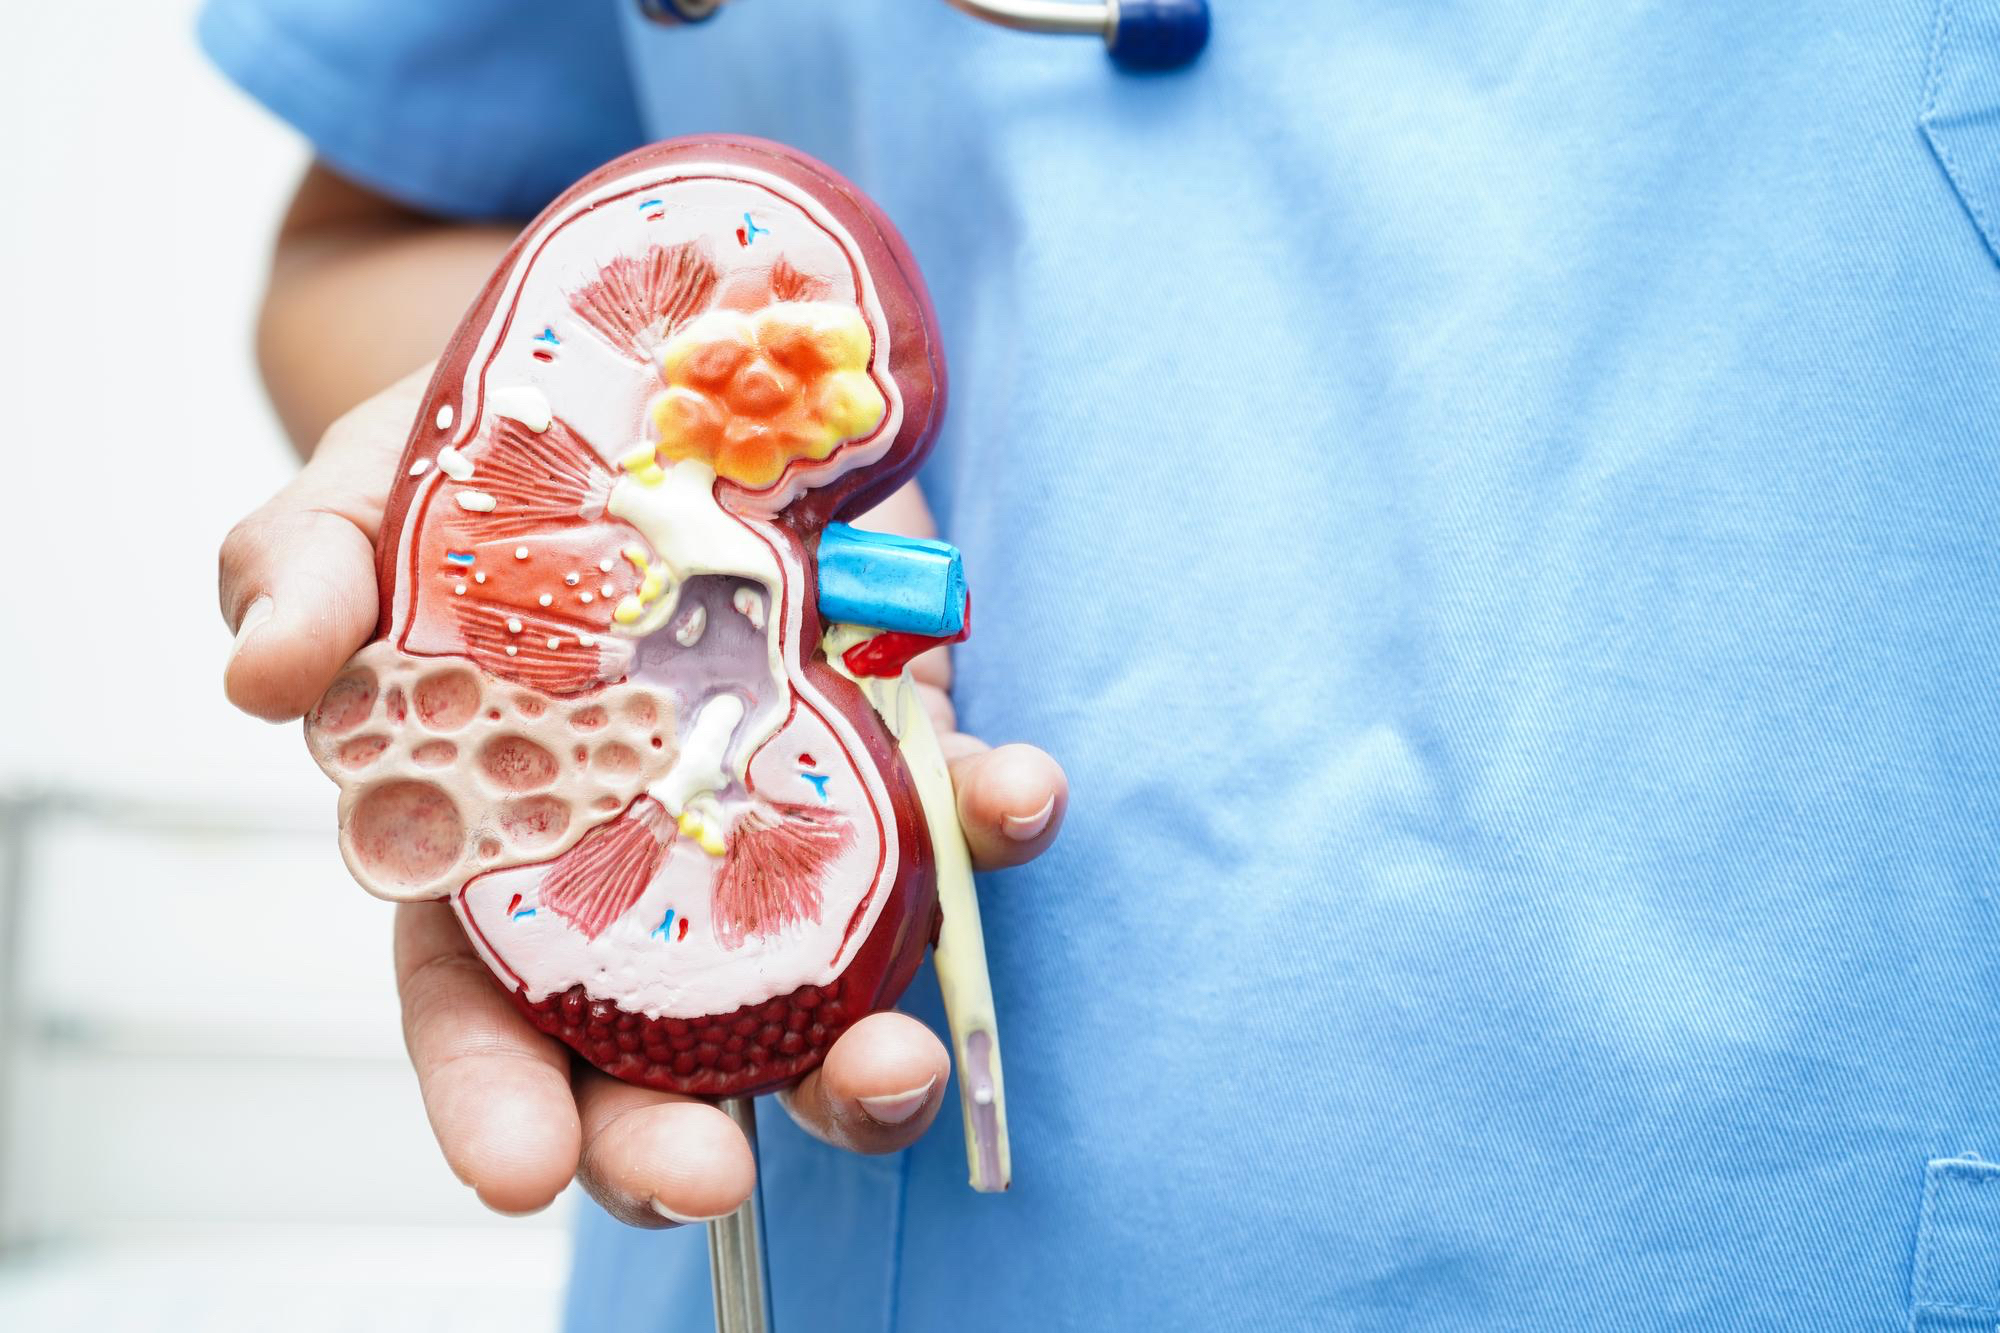 Your liver disease can affect you kidneys more than you think